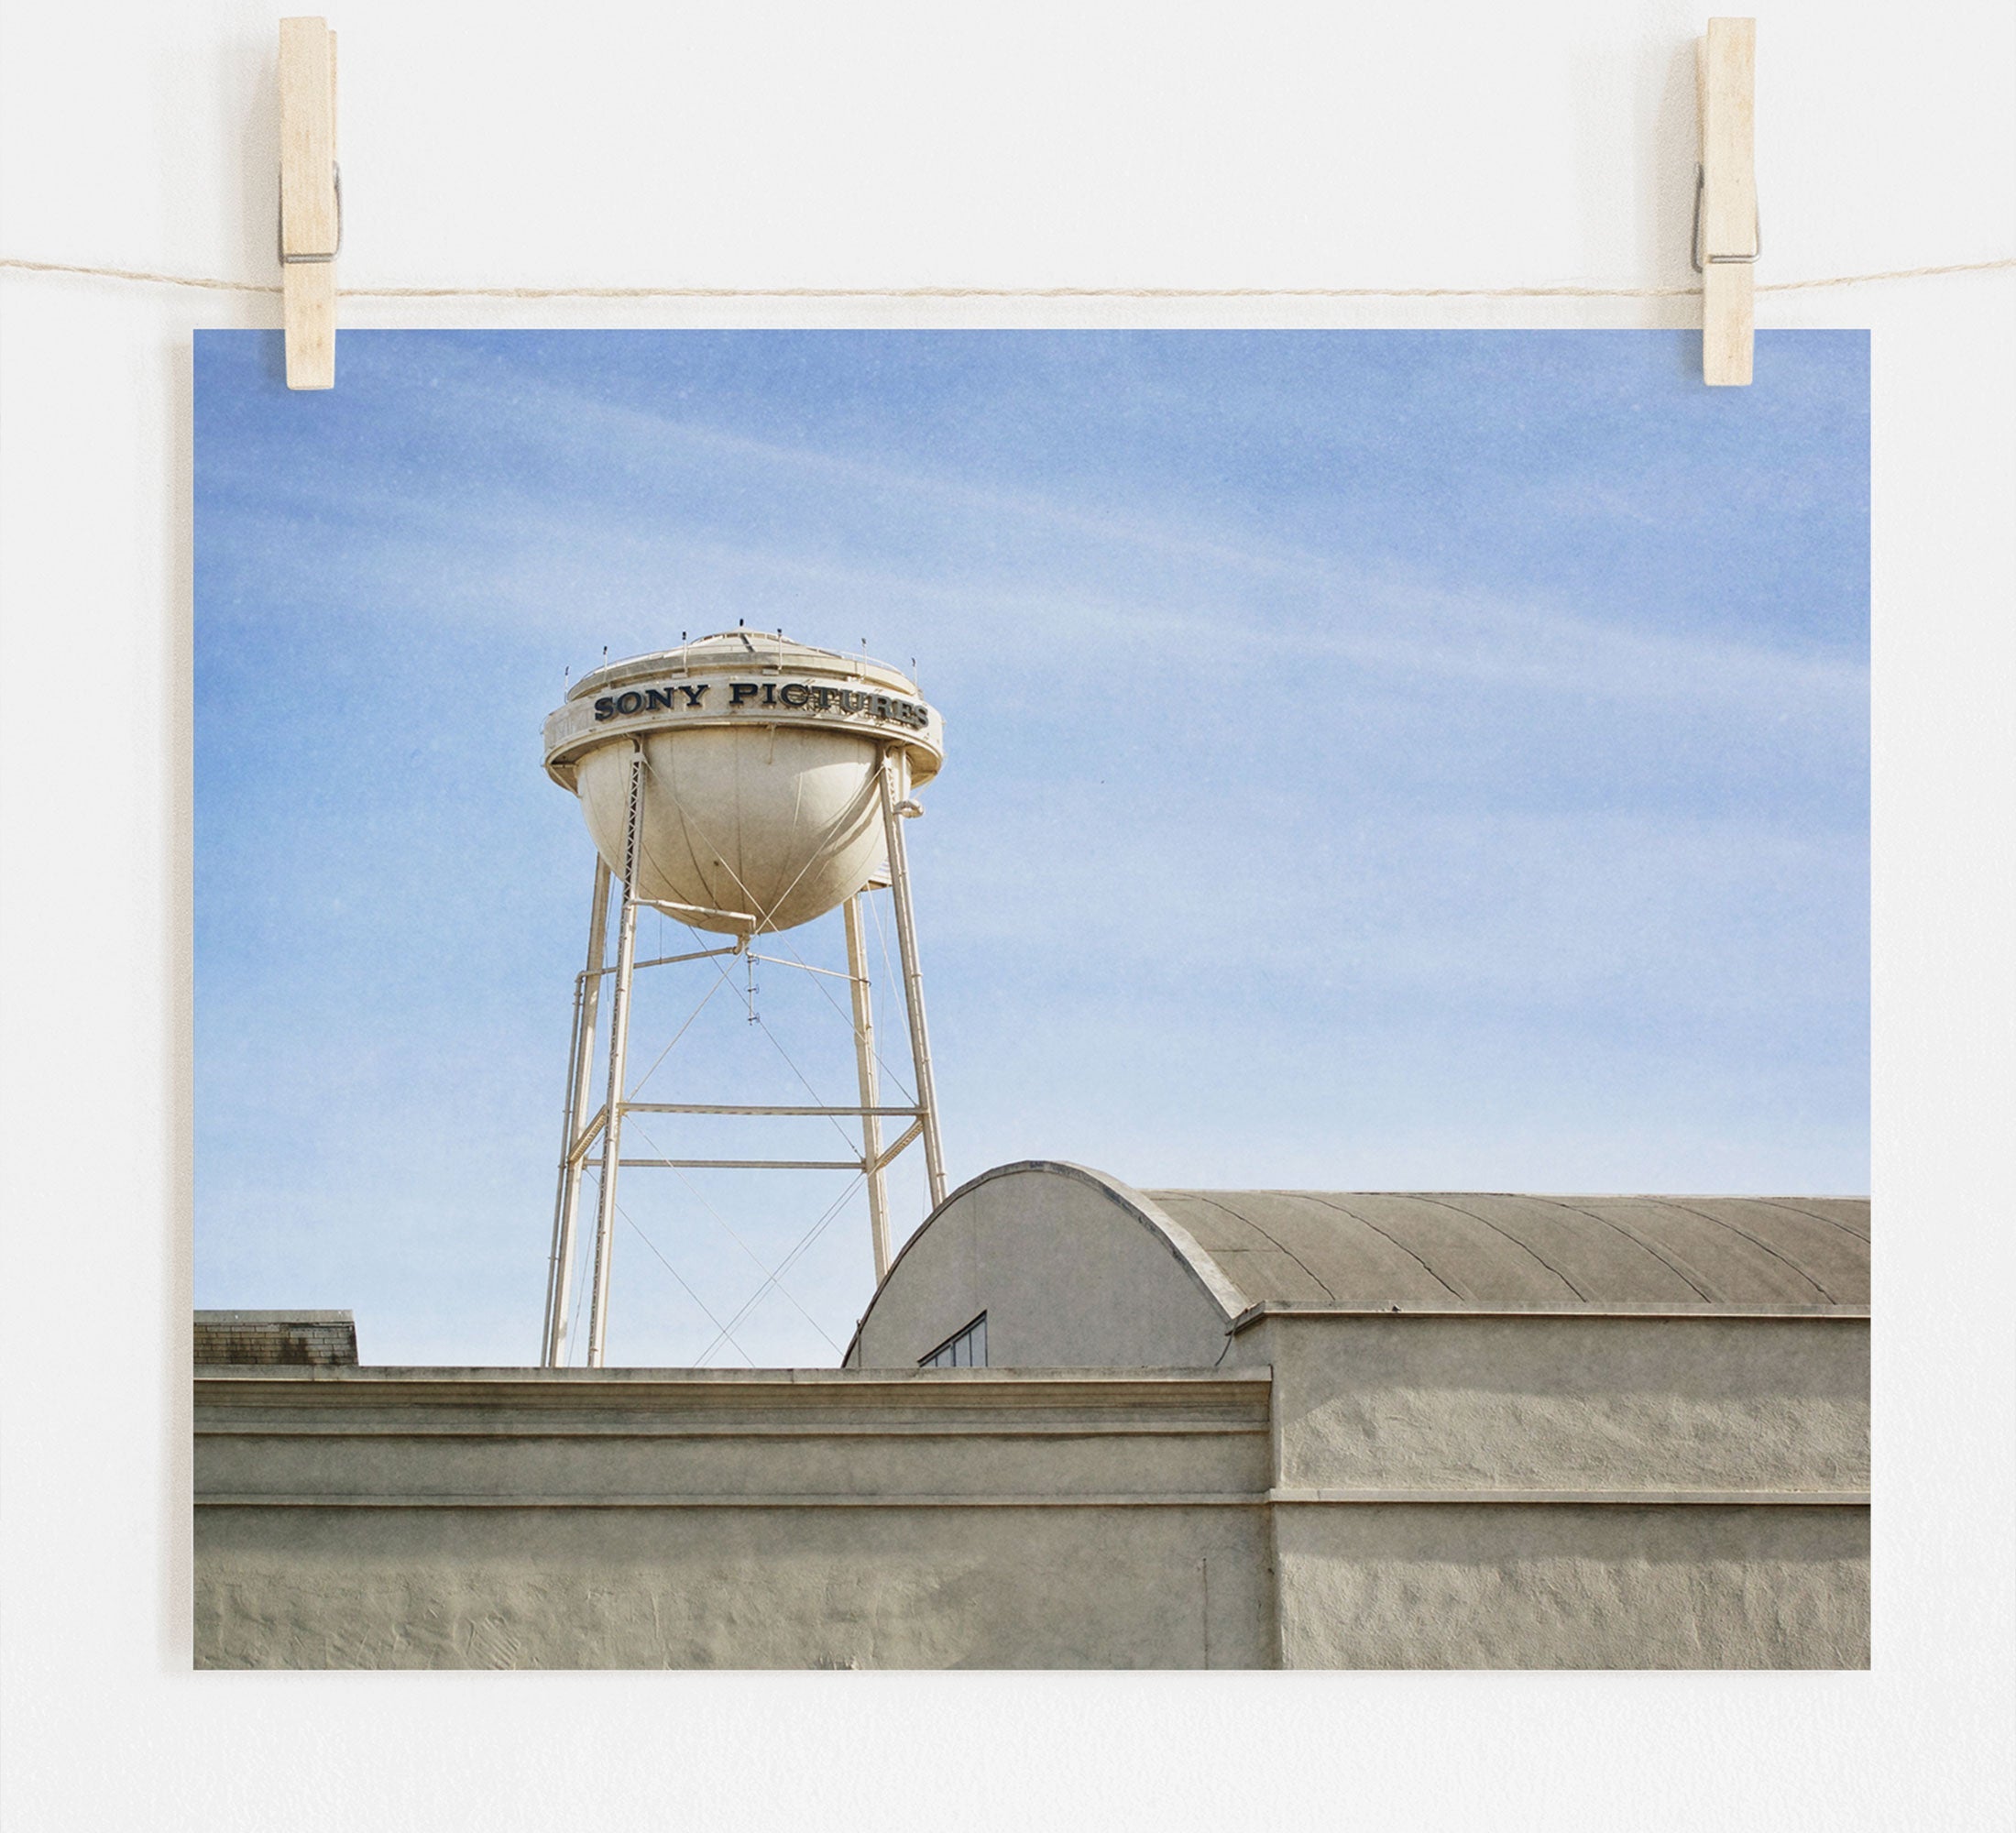 A photo of a water tower labeled "Sony Studios" against a clear sky, seemingly displayed as an unframed print hanging by clips on a wire. This is the Los Angeles Sony Pictures Studio Print by Offley Green, also known as the 'Sony Lot' print.